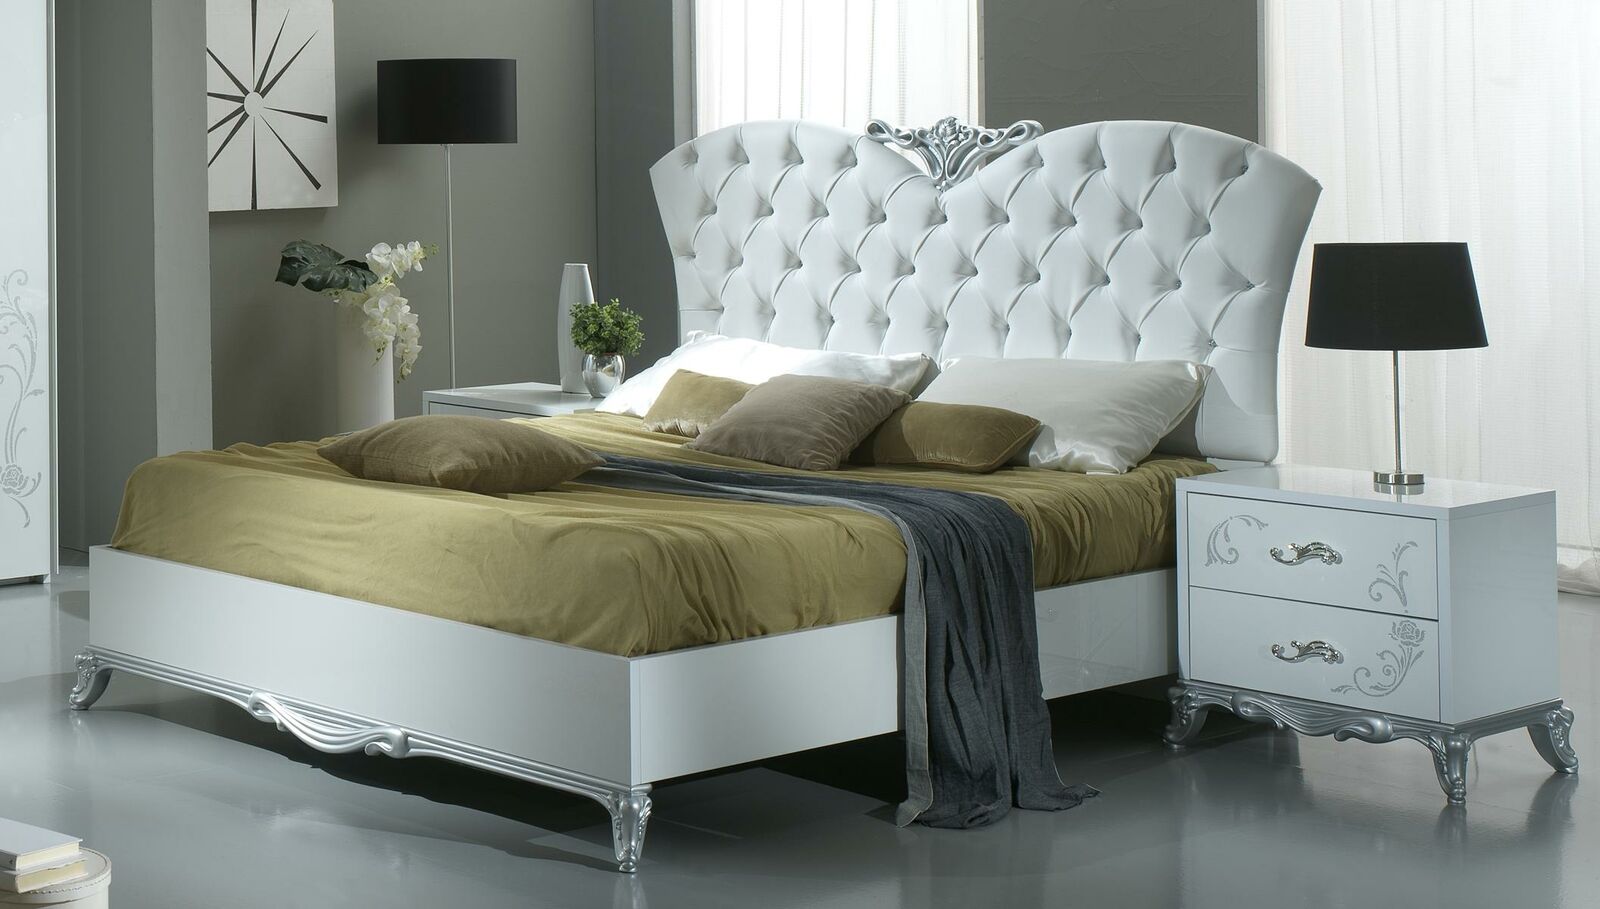 Modern style chesterfield designed double bed 160x200 size, italian furniture